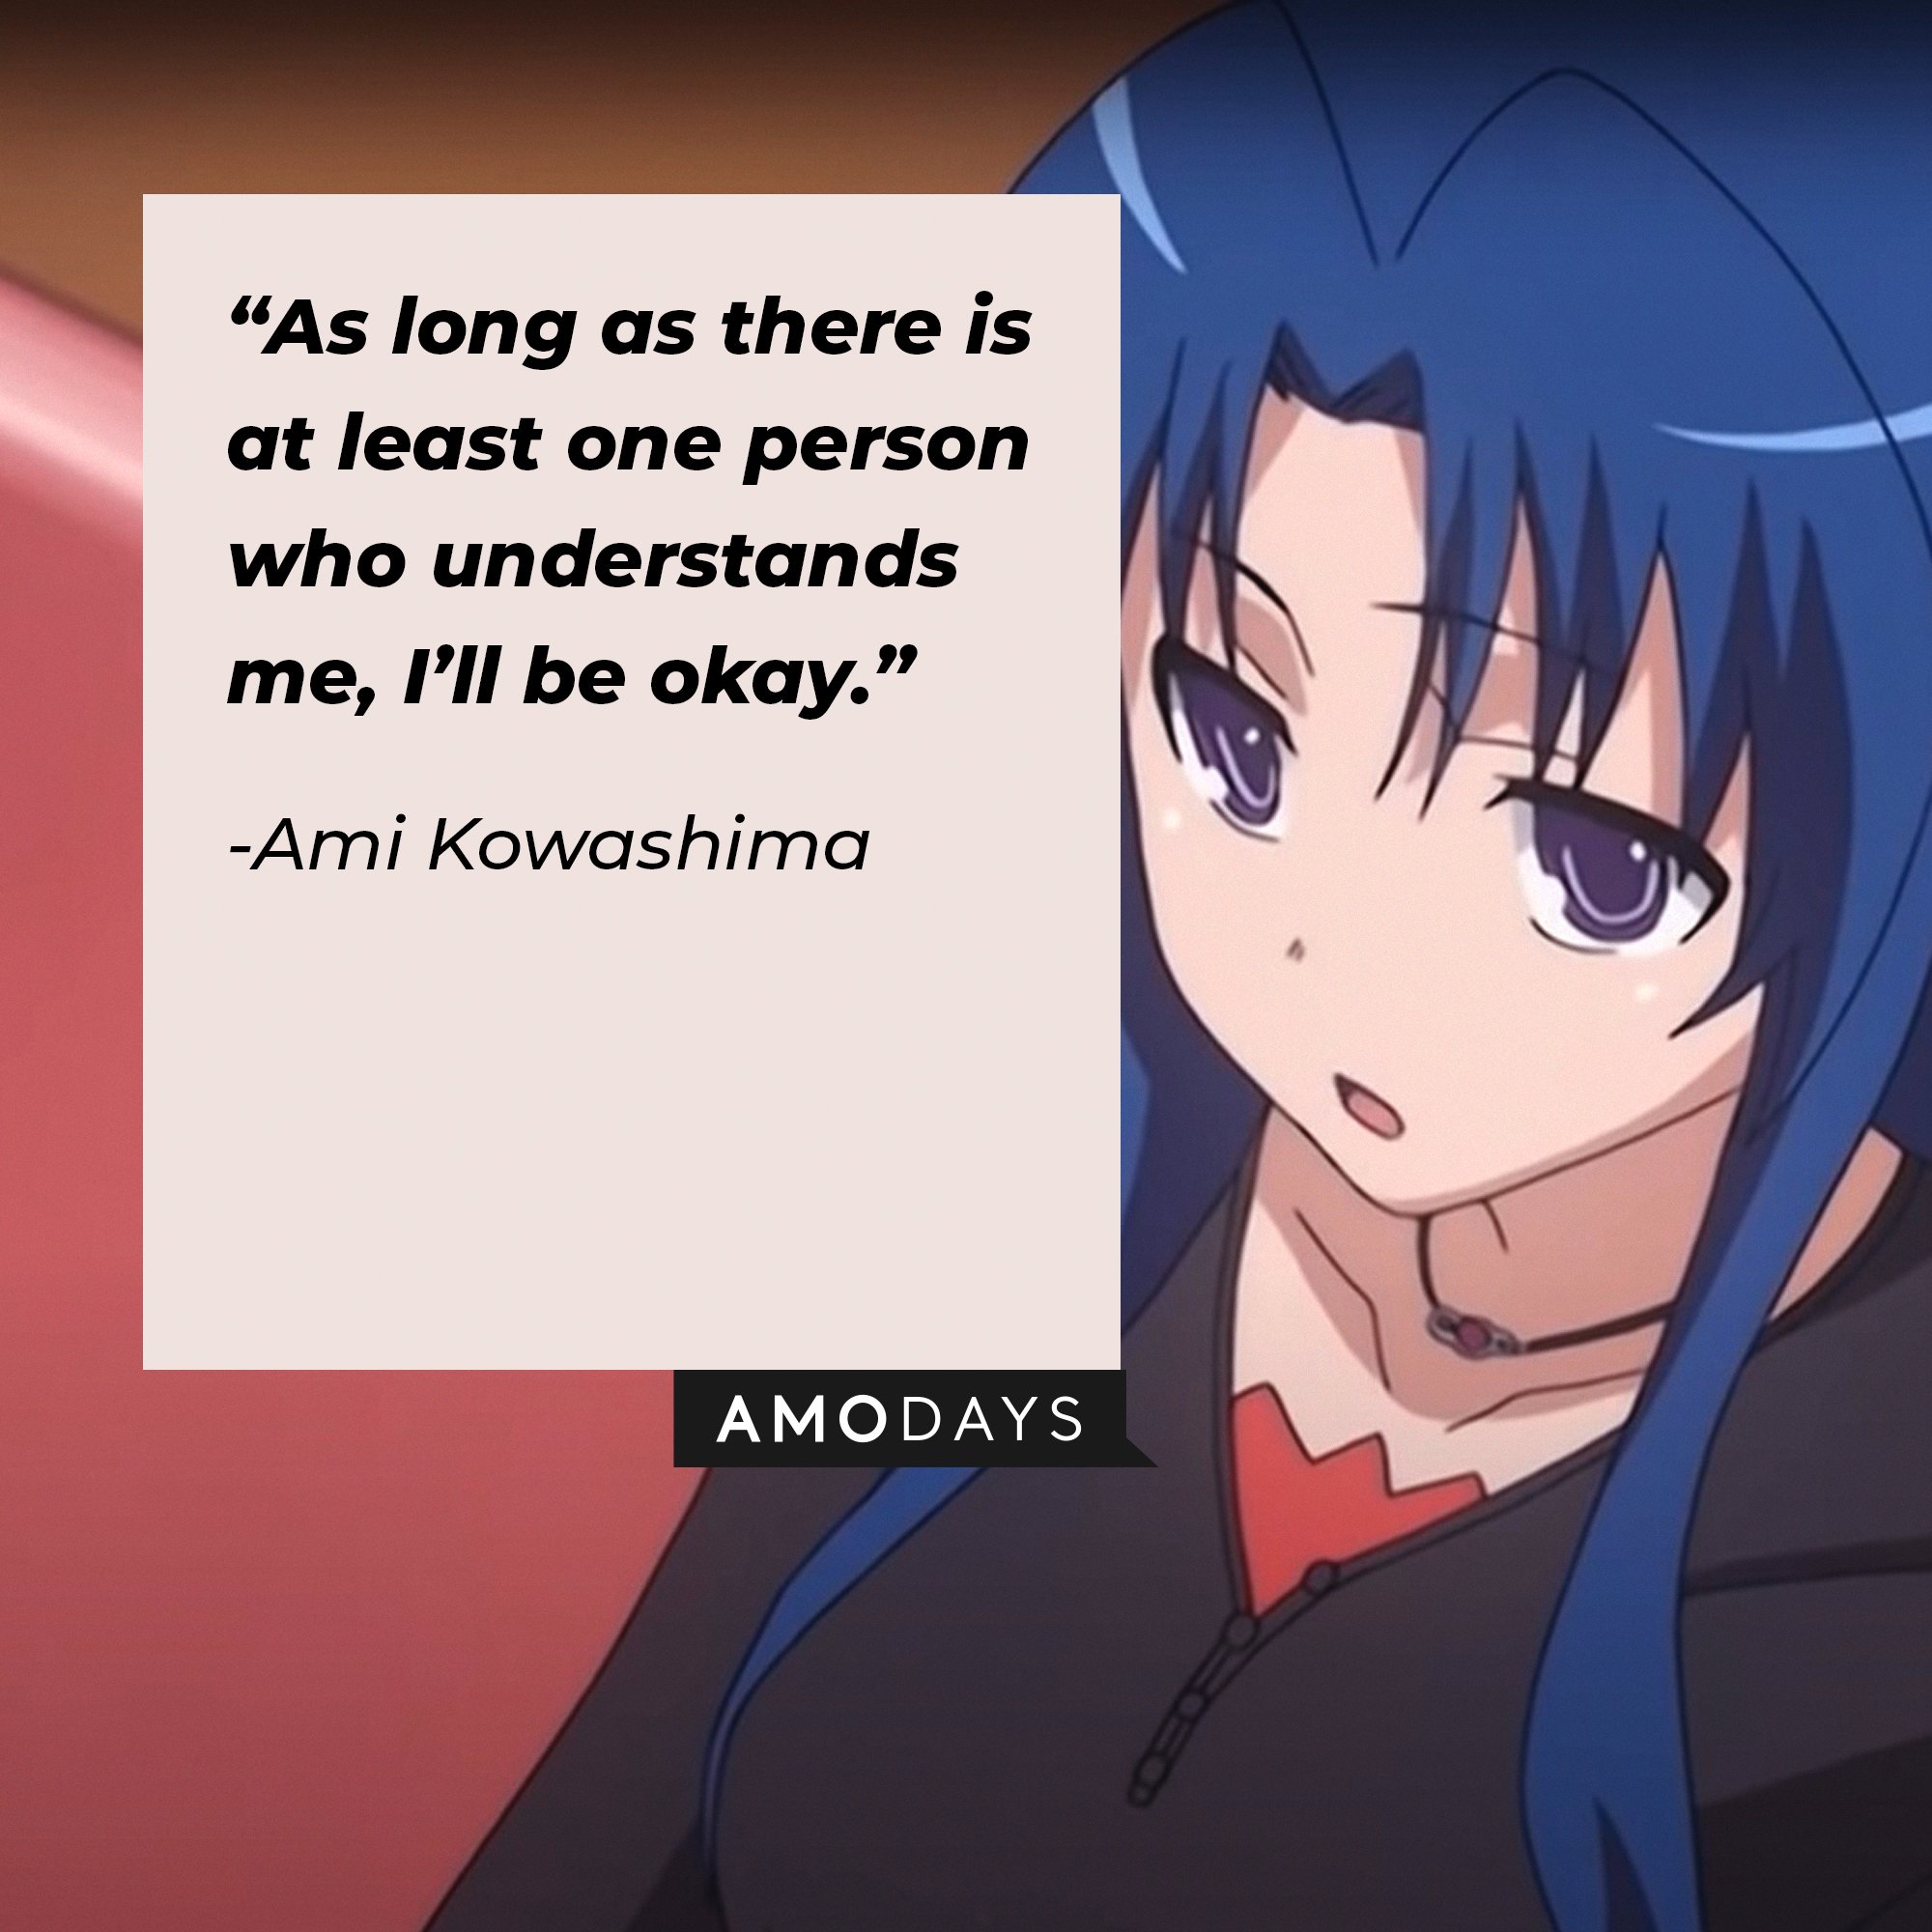  Ami Kowashima’s quote: “As long as there is at least one person who understands me, I’ll be okay.” | Image: AmoDays